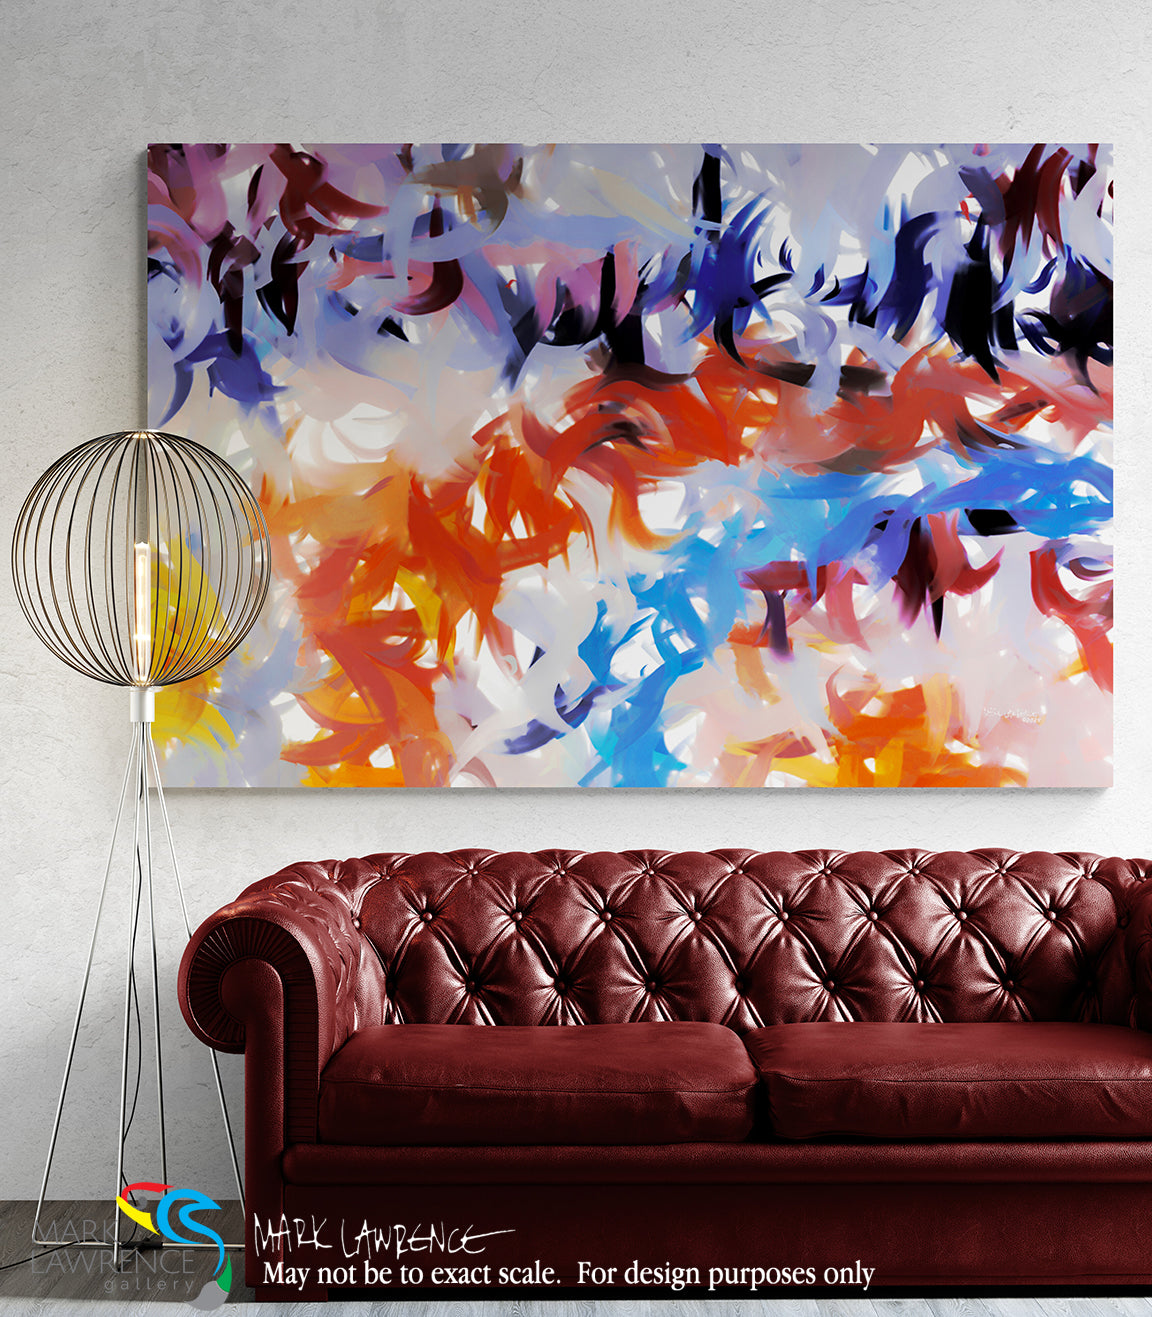 Interior Design Inspiration- Colossians 3:1. Renewed in Christ. Limited Edition Christian Modern Art. Hand embellished & textured giclee paintings with bold brush strokes by the artist. Signed & numbered. Museum quality on canvas wall art prints. Let your focus be on things above, where Christ is seated at the right hand of God. 